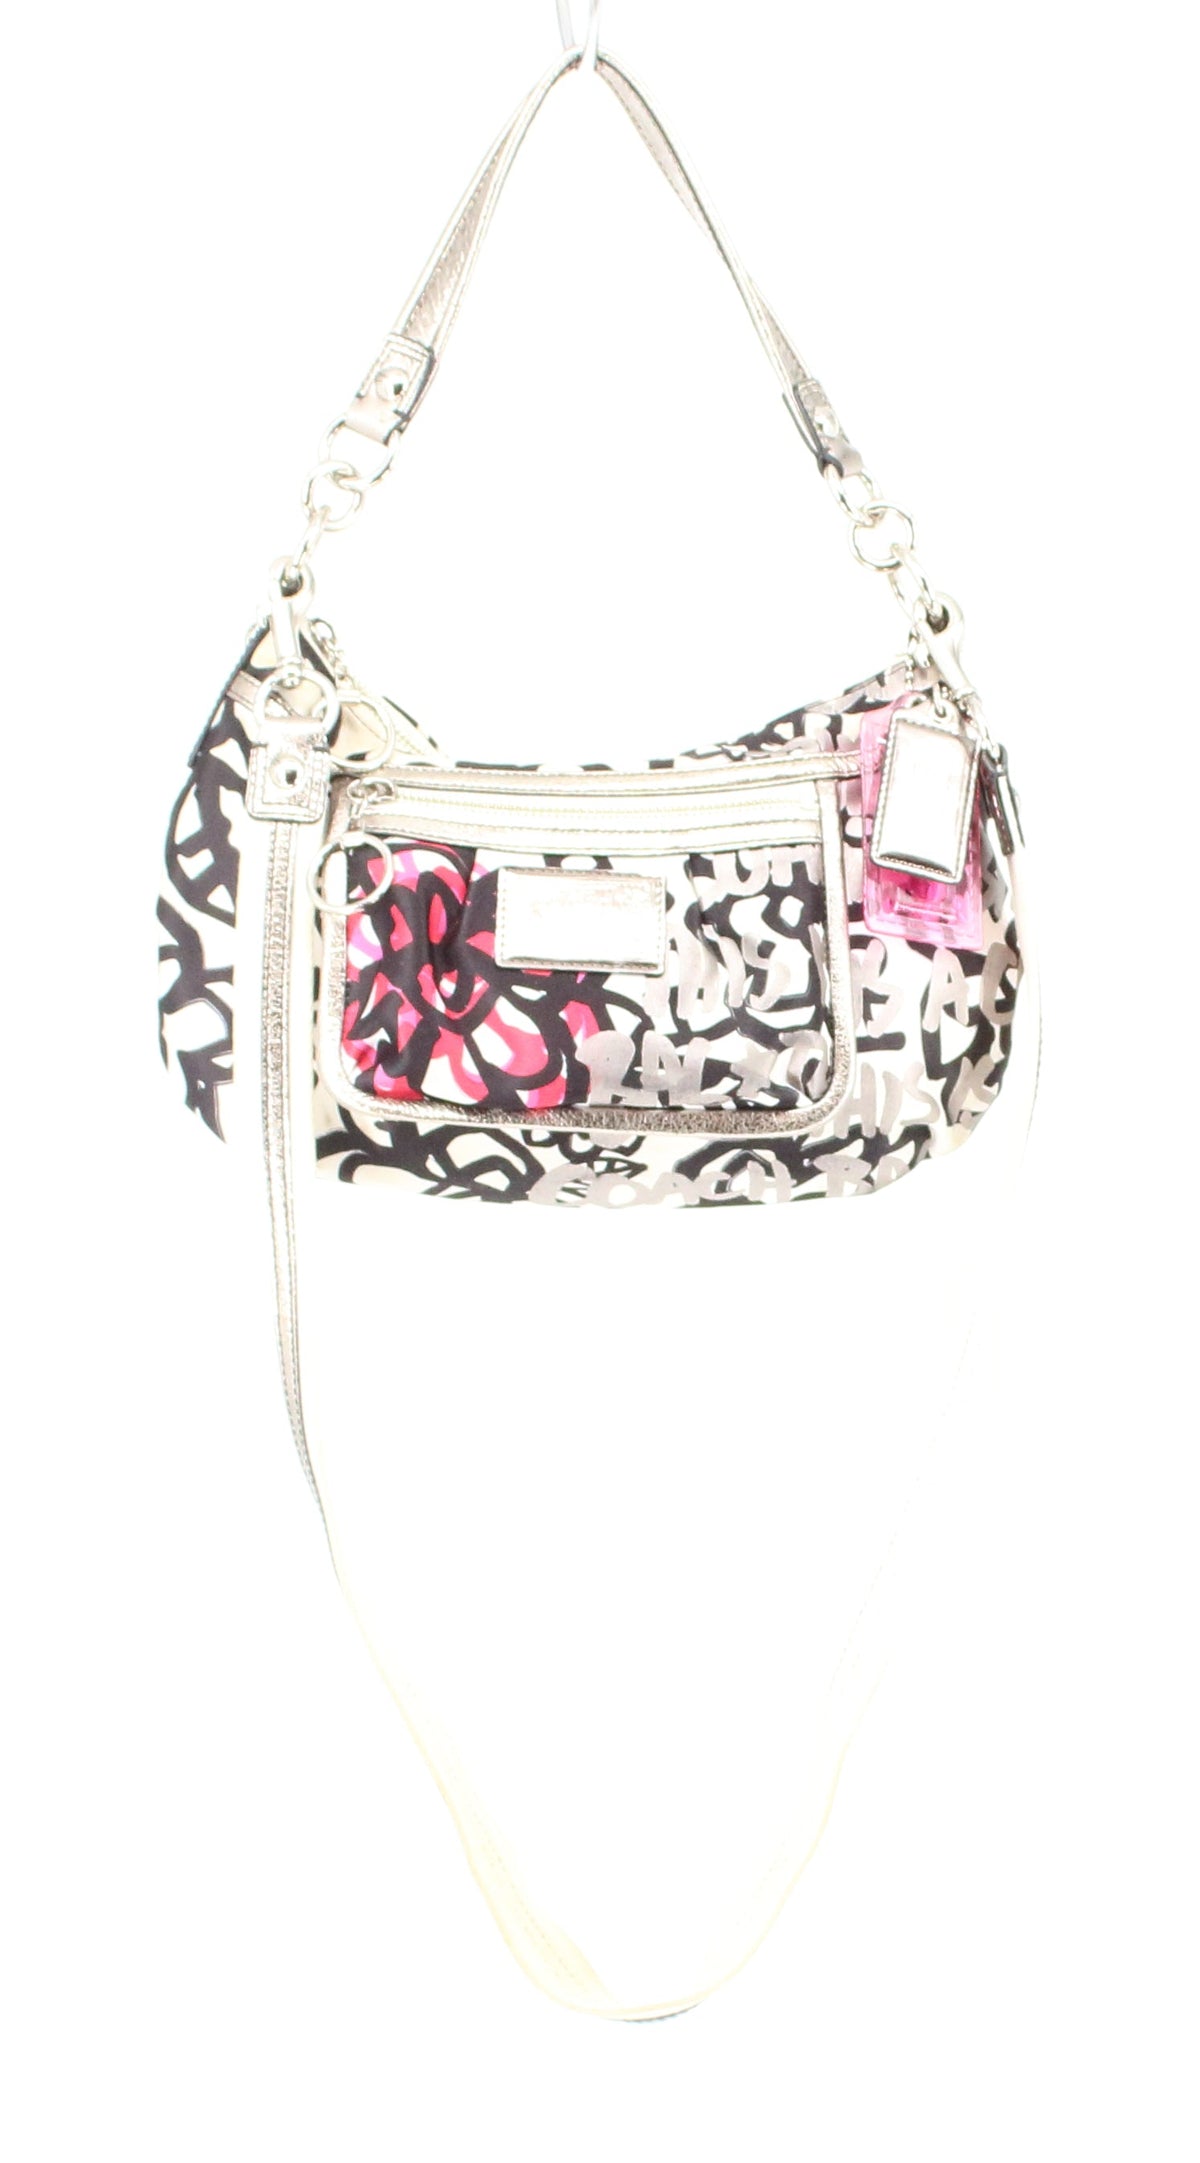 Coach Off White Printed Crossbody Hand Bag With Silver Details